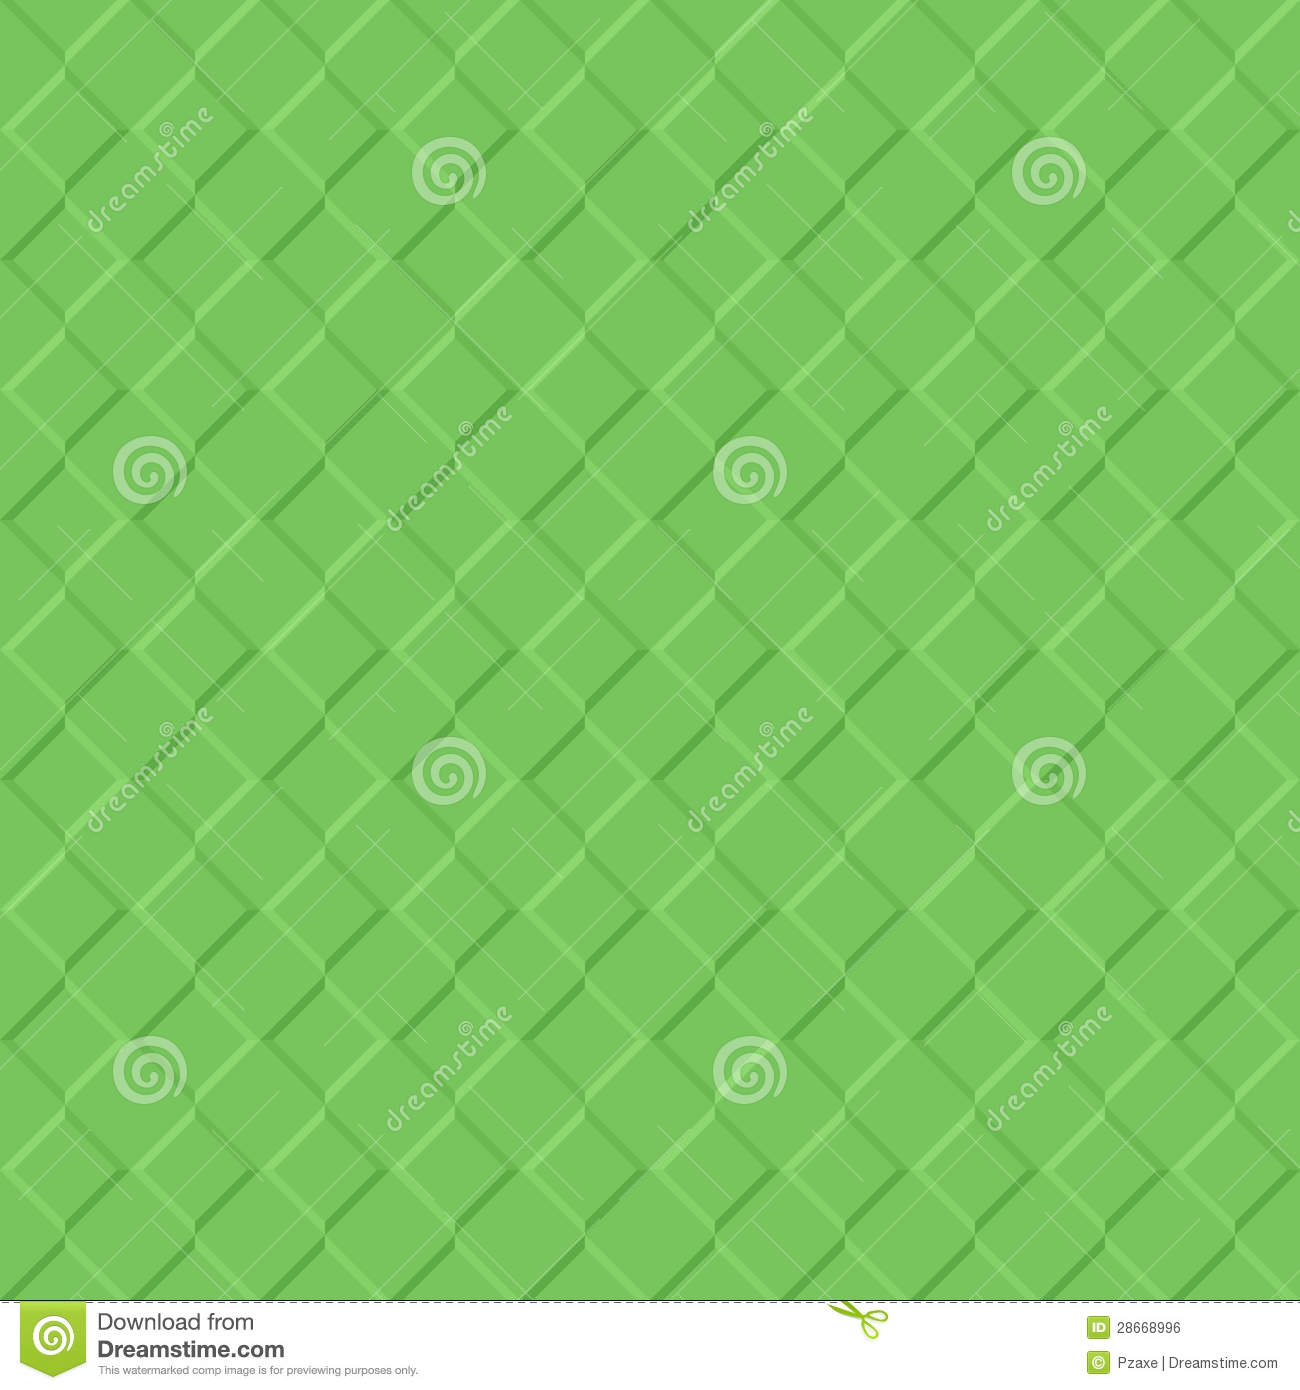 Green Abstract Square Vector